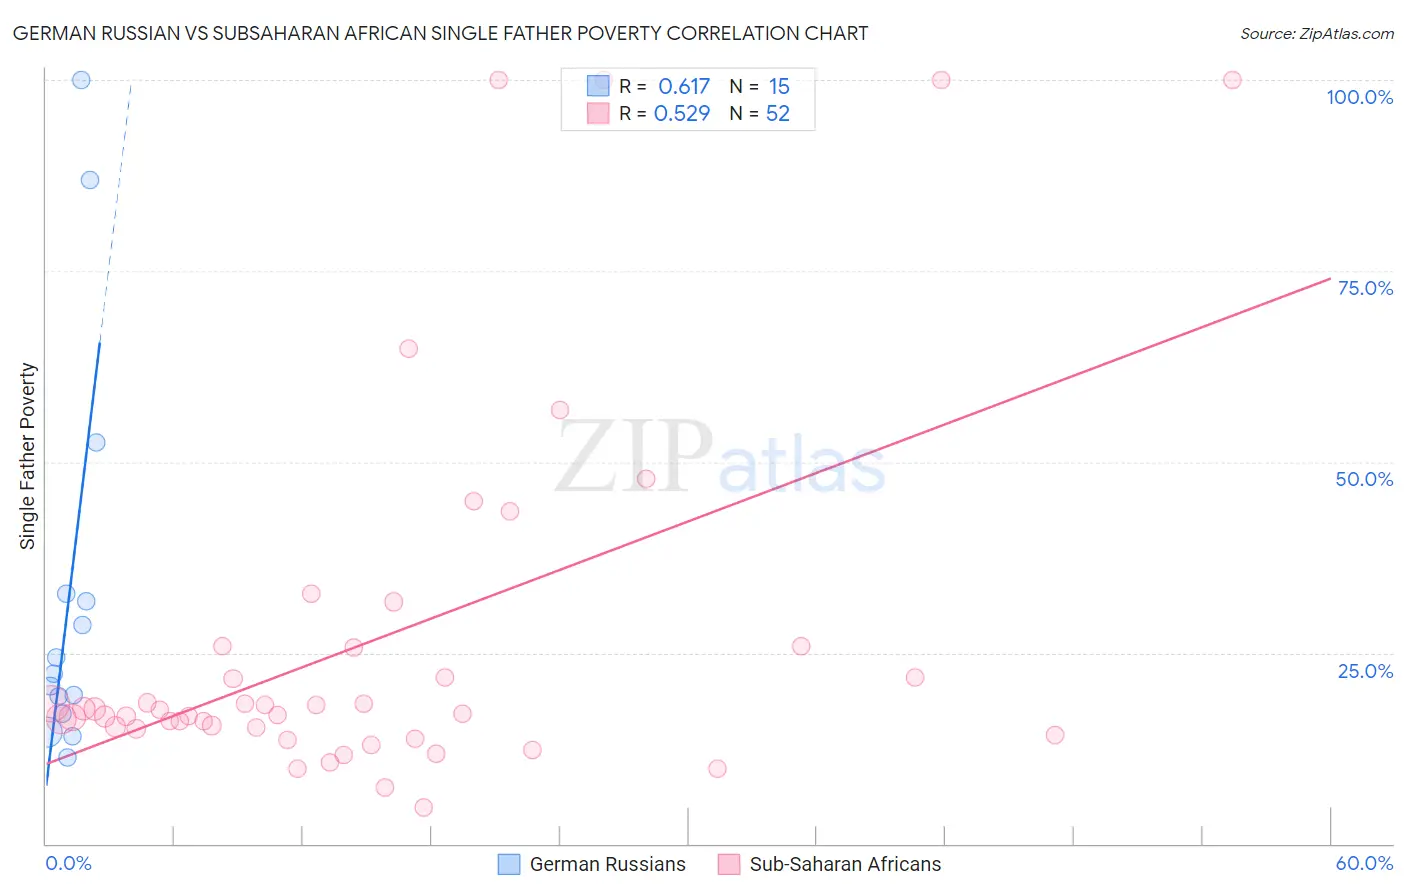 German Russian vs Subsaharan African Single Father Poverty